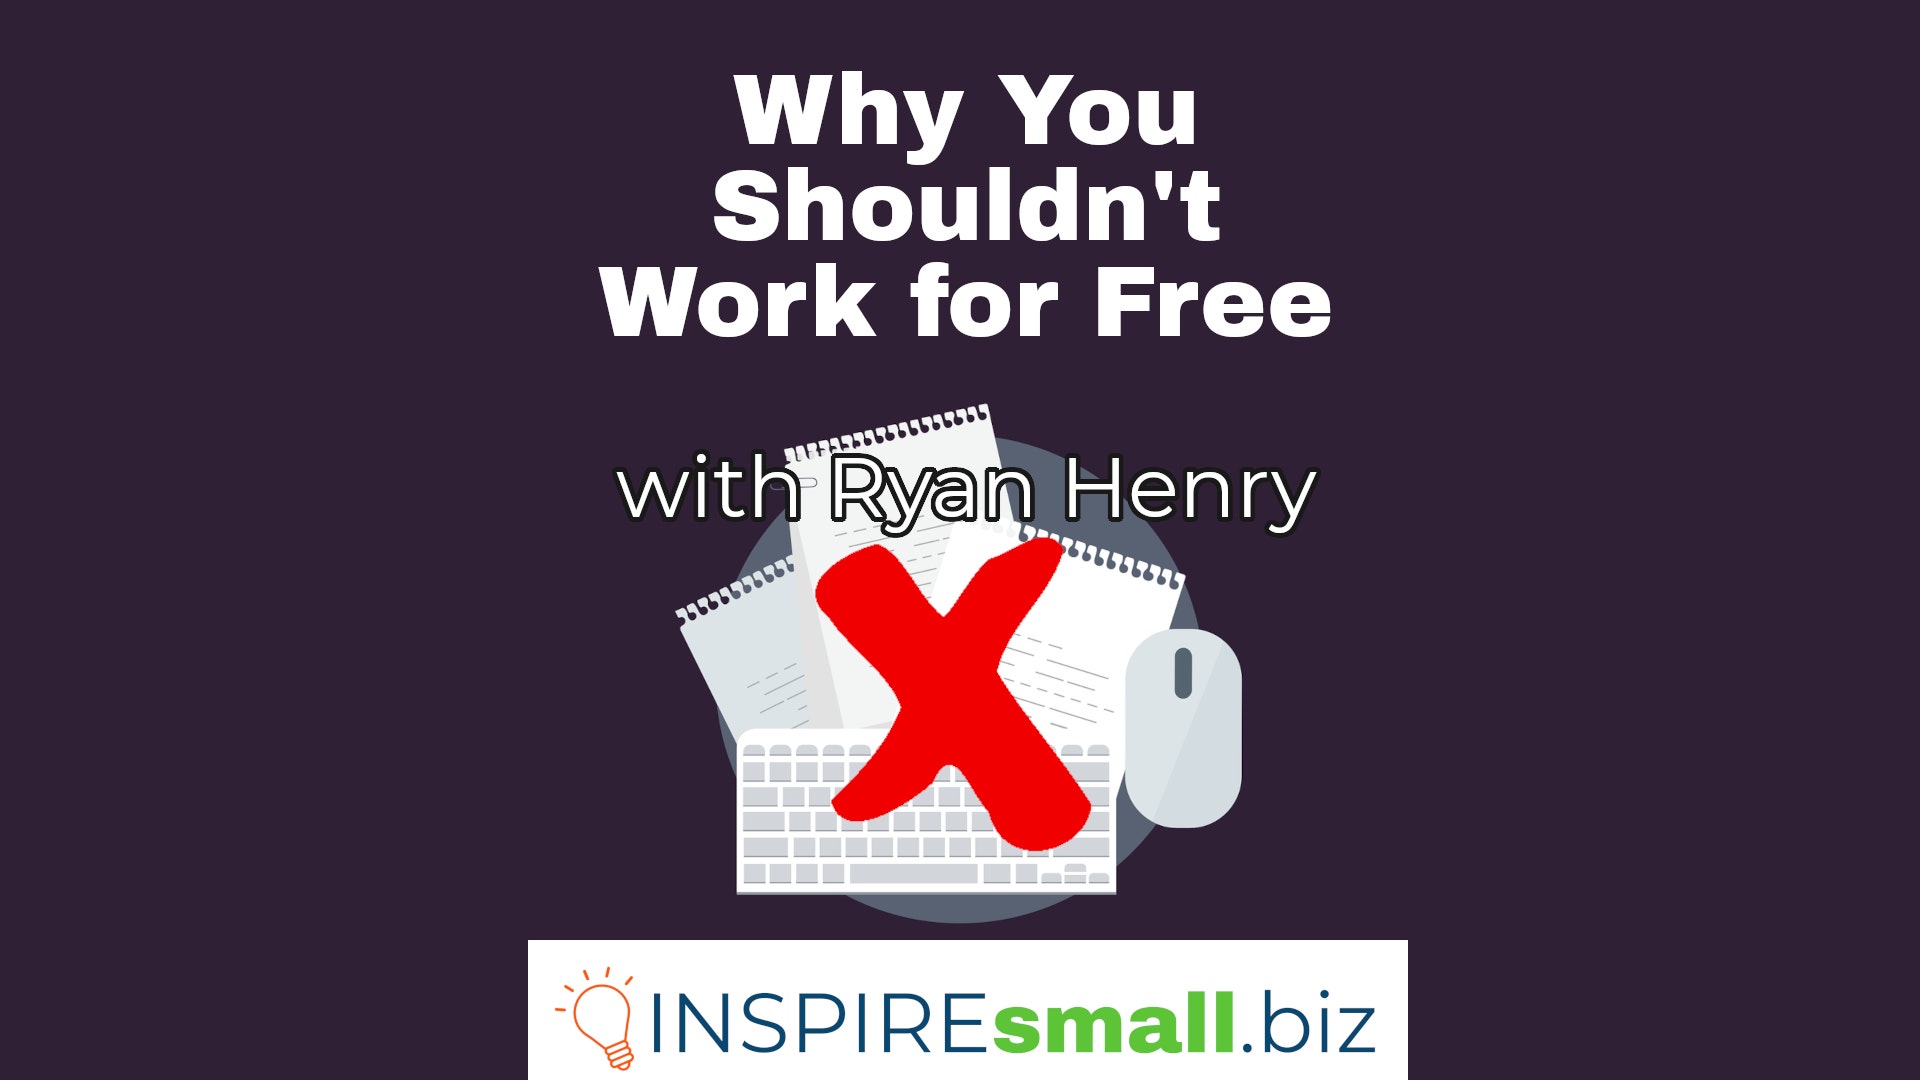 Paperwork and a keyboard and mouse, under a red x, with the text Why You Shouldn't Work for Free with Ryan Henry, hosted by INSPIREsmall.biz